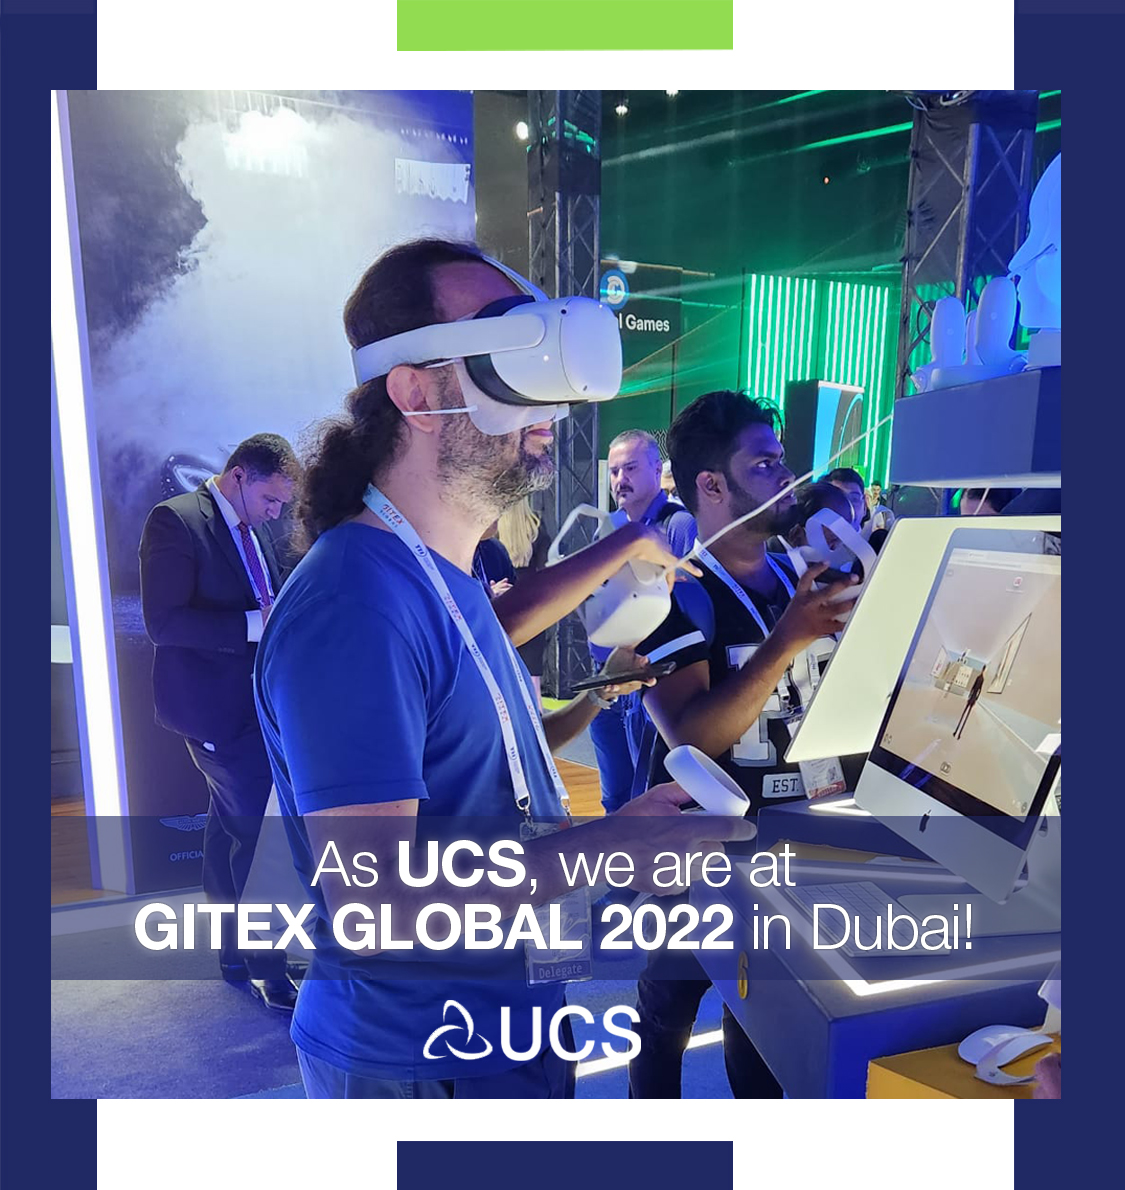 As UCS, we are at GITEX GLOBAL 2022 in Dubai